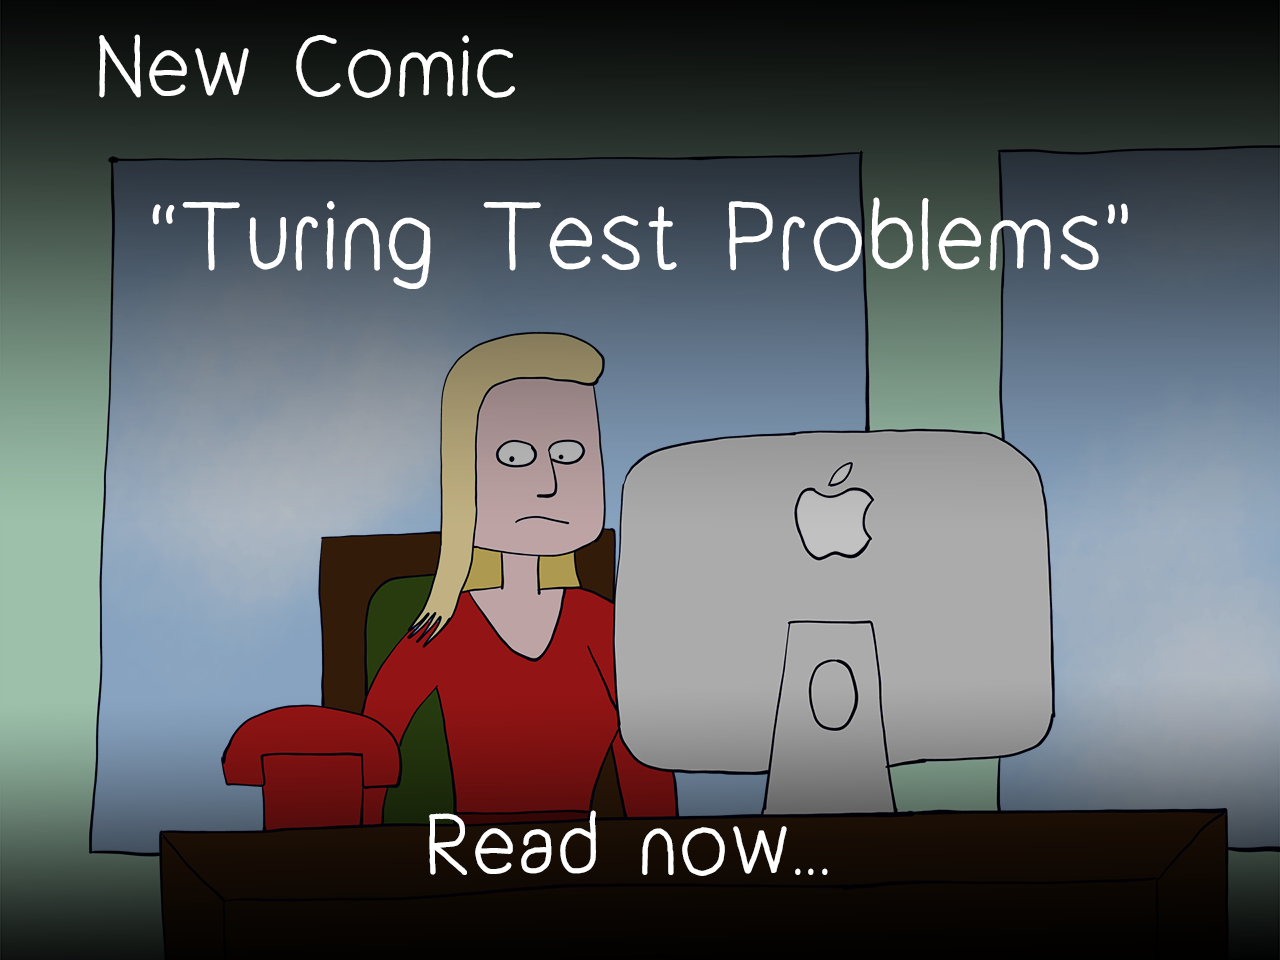 Turing Test Problems